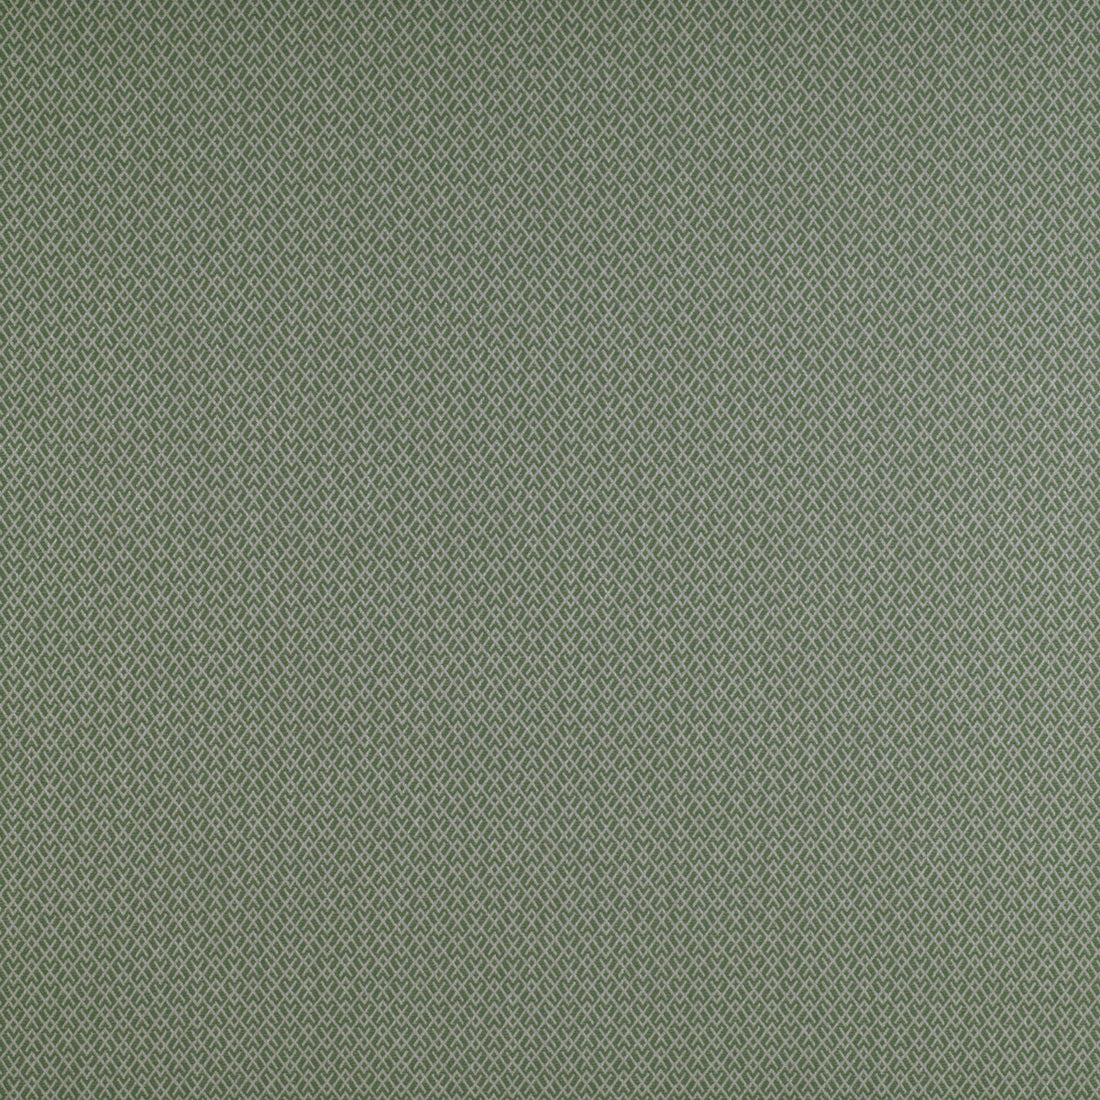 Chueca fabric in verde color - pattern GDT5205.014.0 - by Gaston y Daniela in the Madrid collection